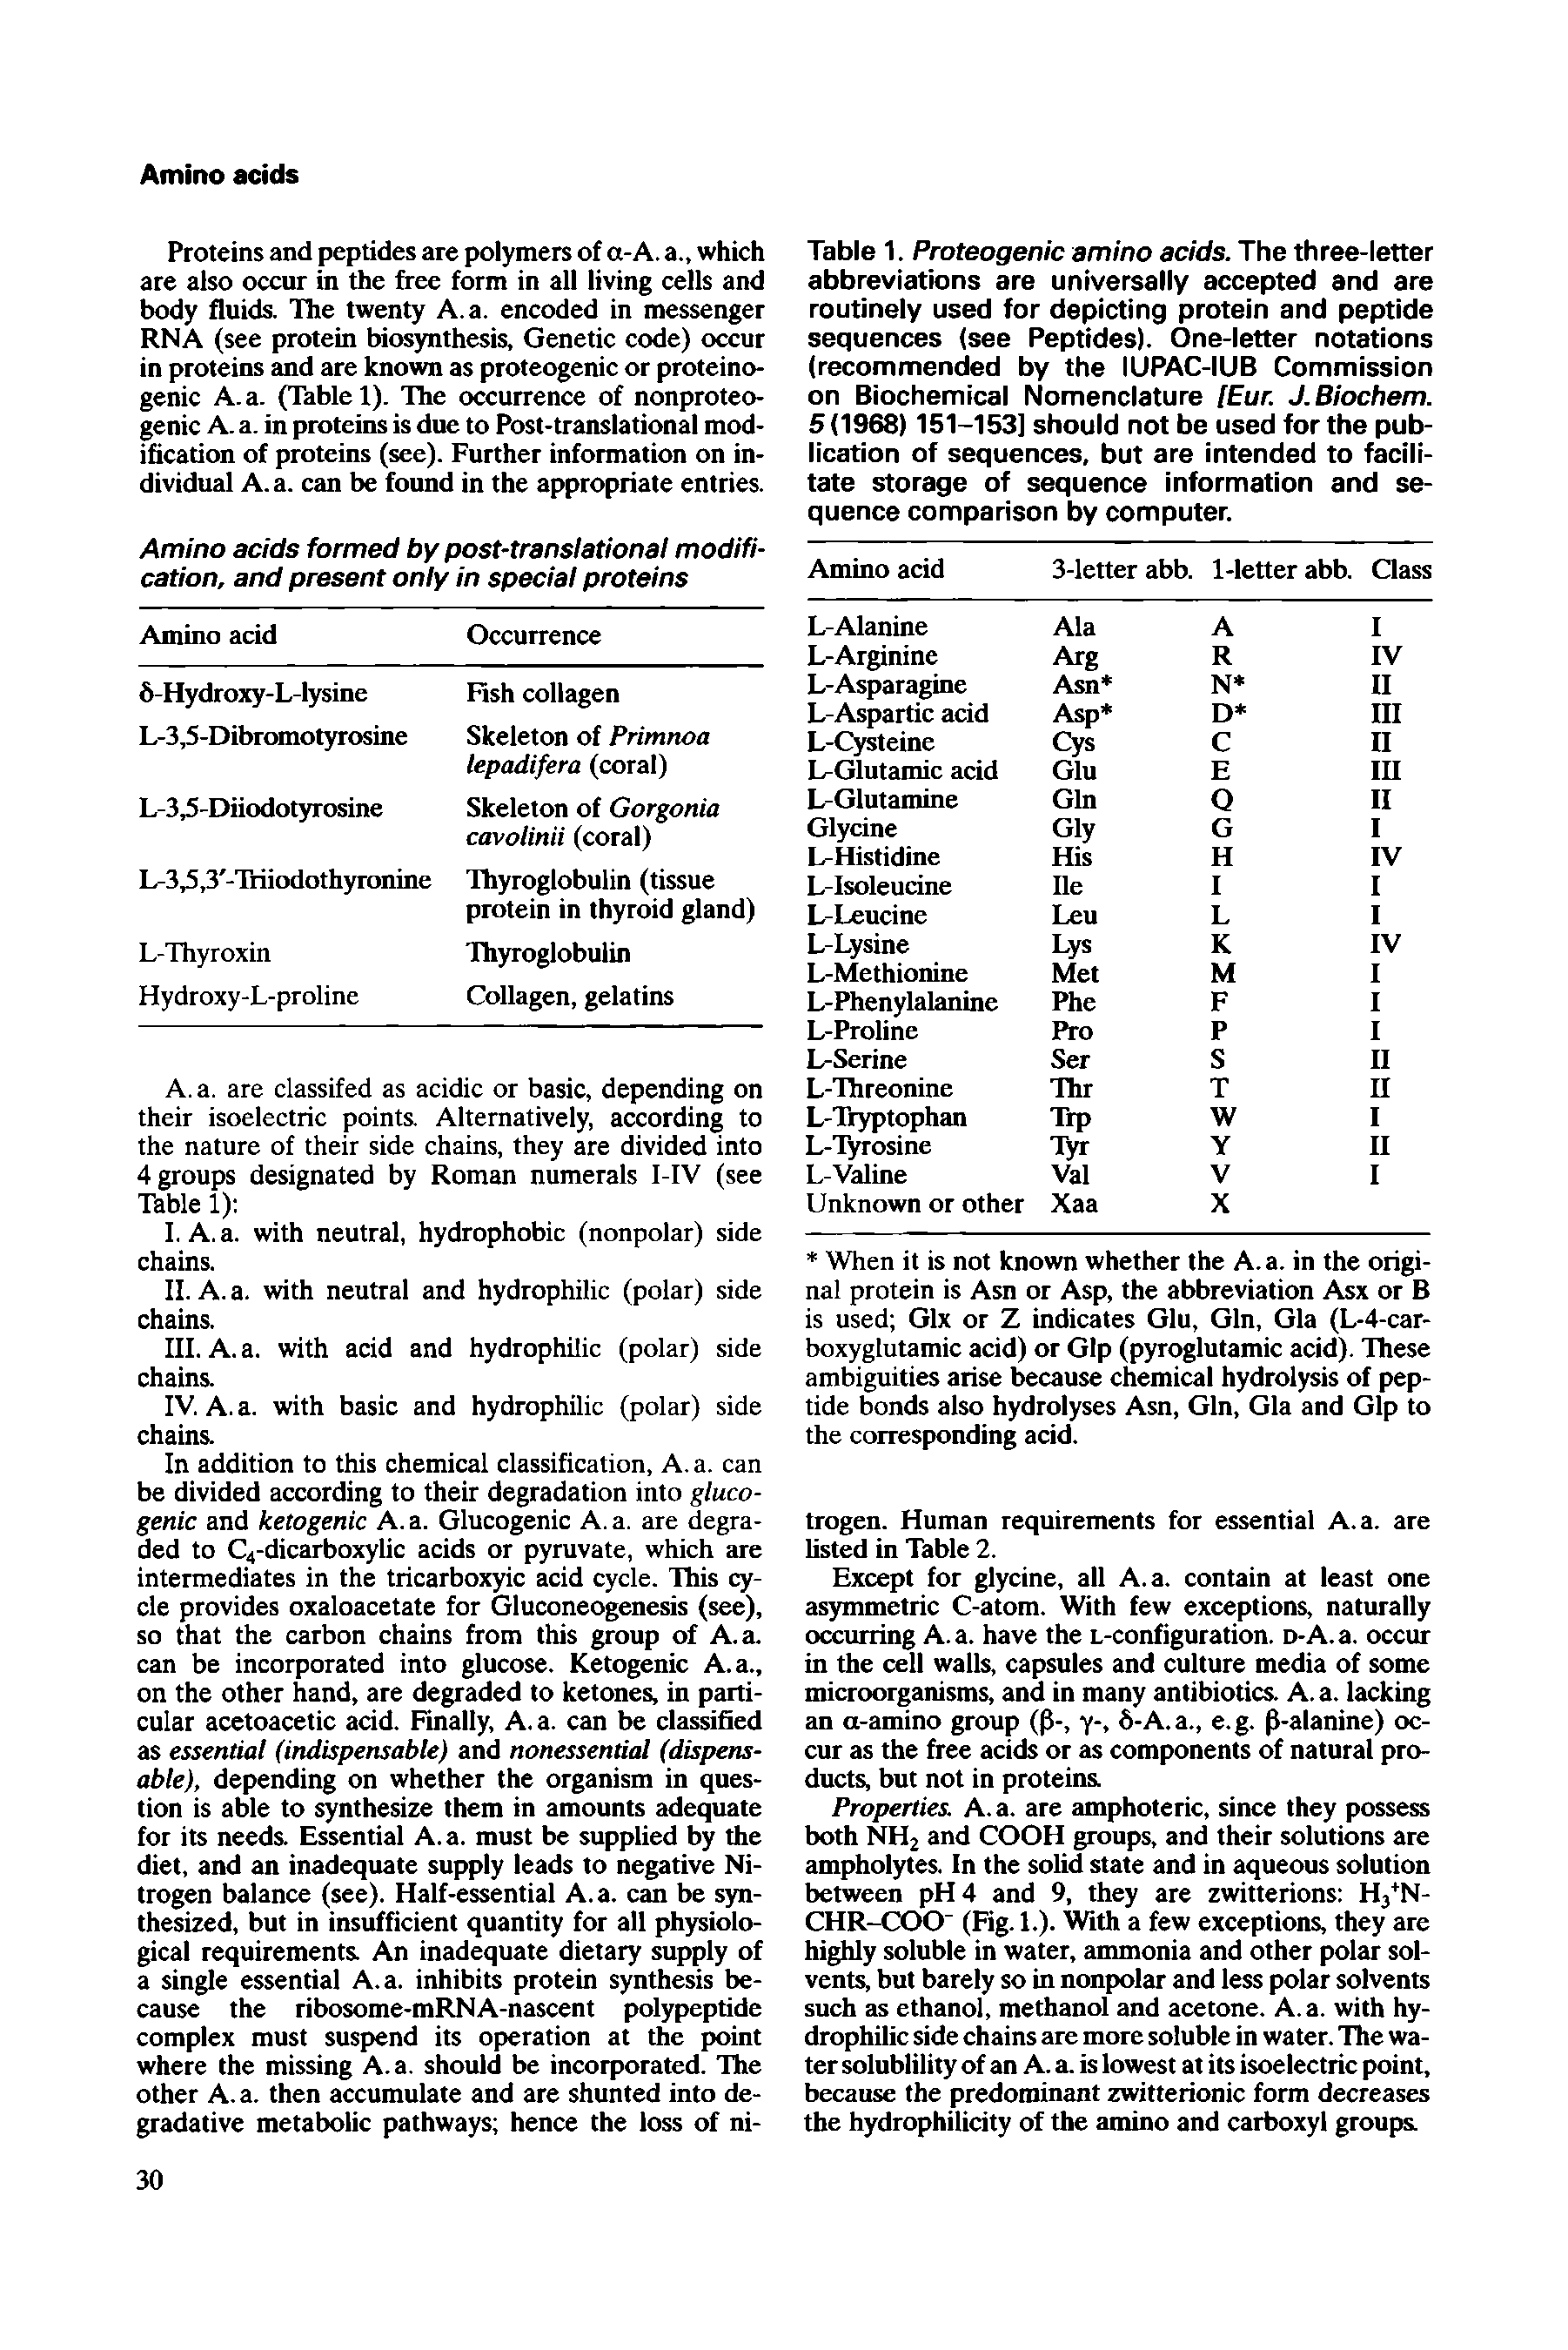 Table 1. Proteogenic amino acids. The three-letter abbreviations are universally accepted and are routinely used for depicting protein and peptide sequences (see Peptides). One-letter notations (recommended by the llJPAC-lUB Commission on Biochemical Nomenclature [Eur. J.Biochem. 5 (1968) 151-153] should not be used for the publication of sequences, but are intended to facilitate storage of sequence information and sequence comparison by computer.